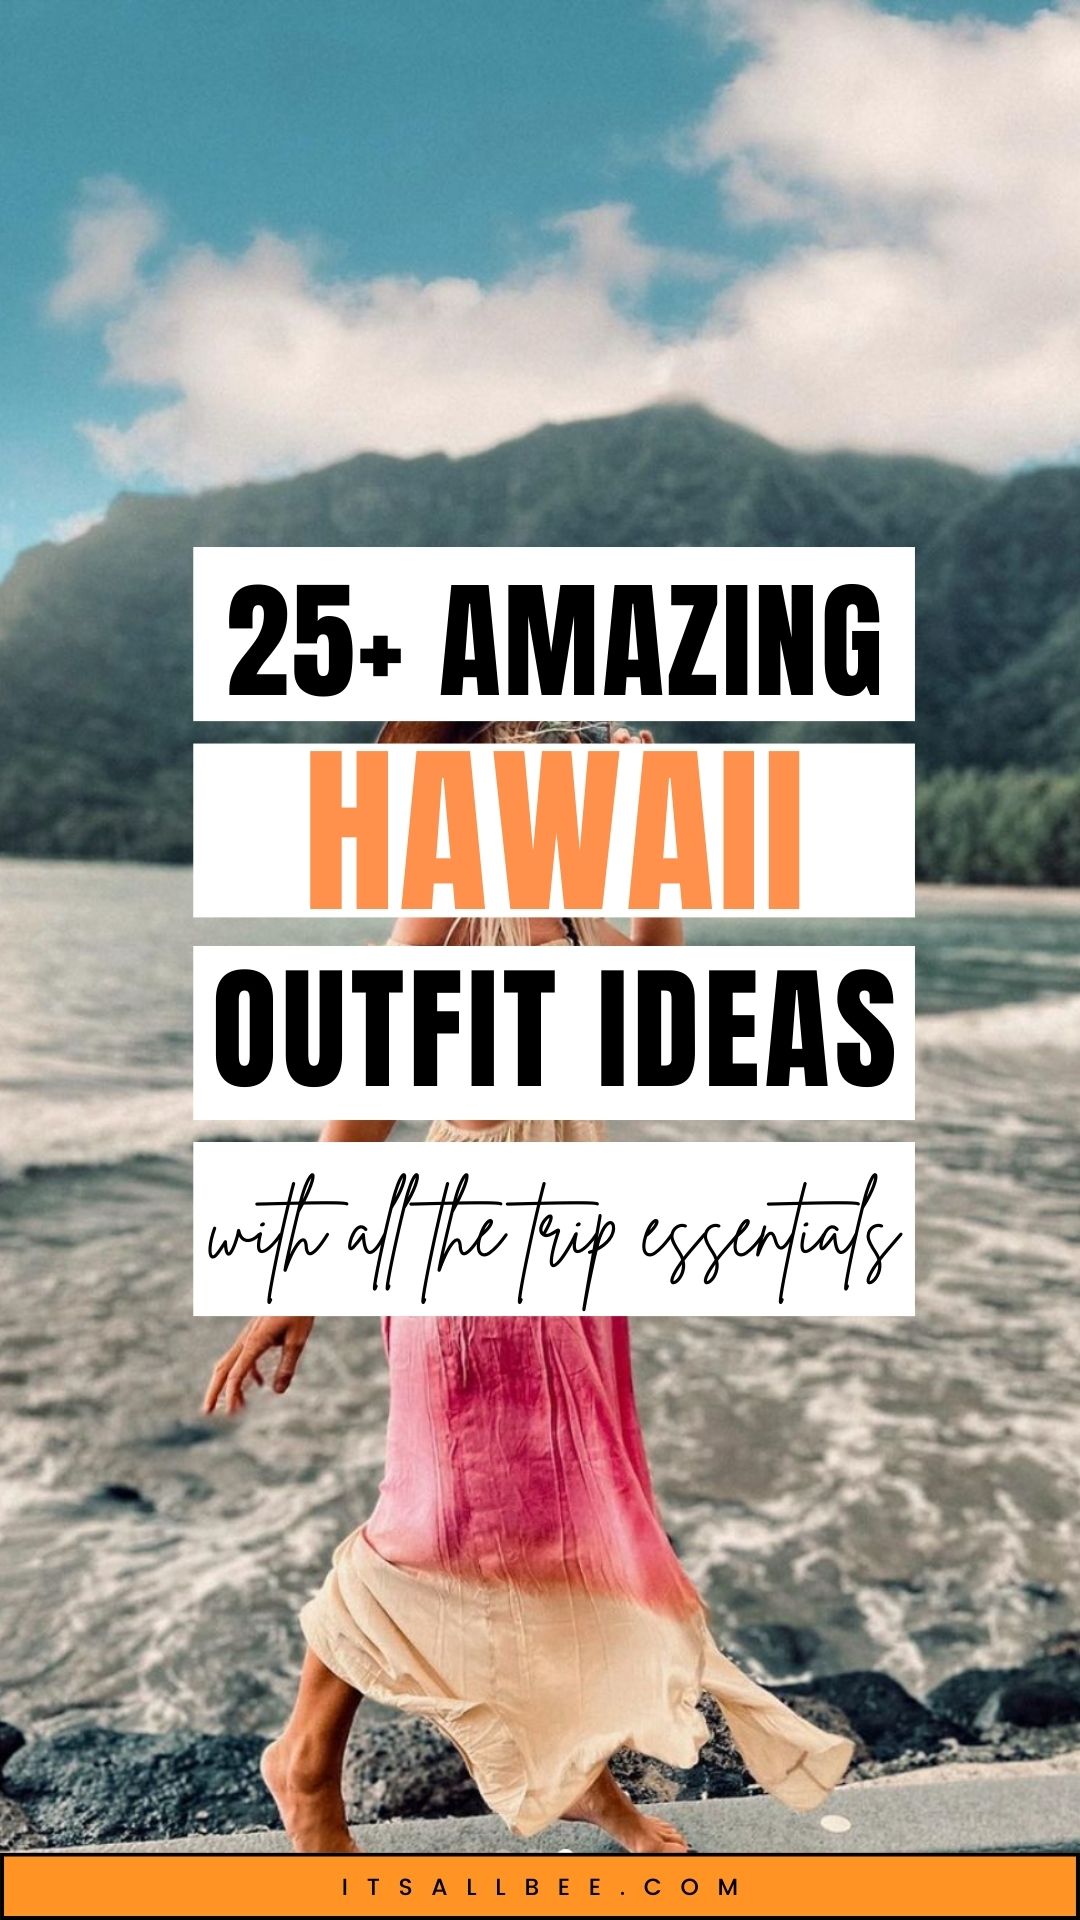 Discover the ultimate Hawaiian outfit inspiration with our top 21 ensemble ideas for every island activity. From beach lounging to elegant dinners, our packing list ensures you're stylishly prepared for paradise. #HawaiiFashion #TravelInStyle | Hawaii Outfit ideas | Hawaii Summer Outfit | Spring Outfit | Beach Outfit | Vacation Outfit